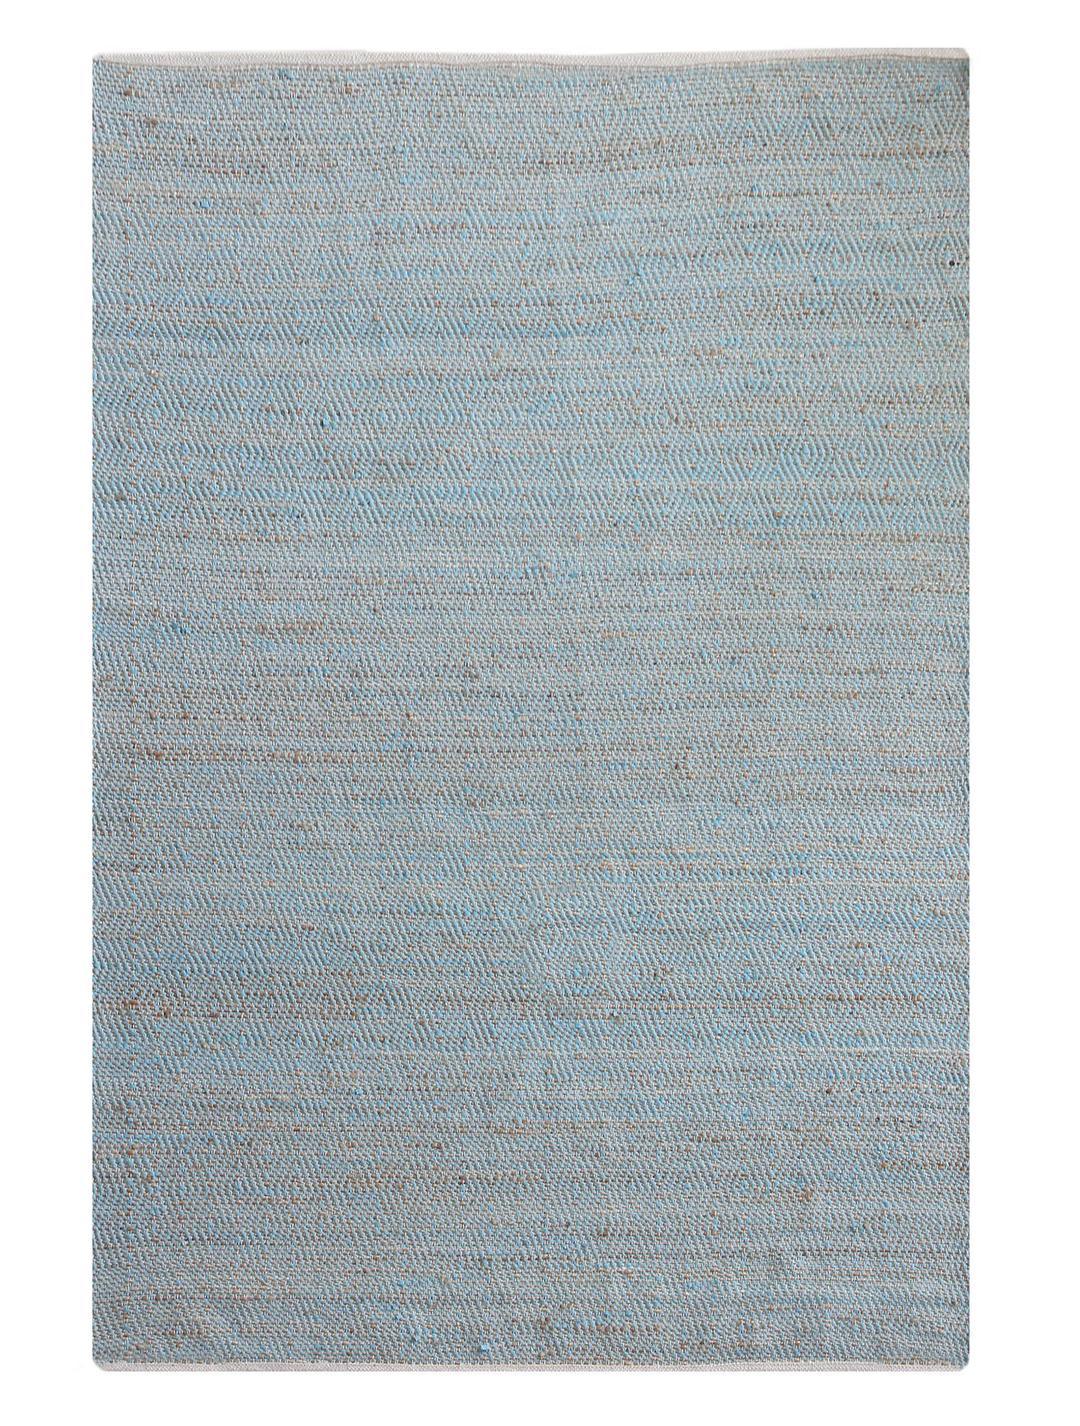 Jordan Hemp & Cotton Rug-Comfort-HEMP RUGS, RECYCLED COTTON & COTTON RUGS, RUGS, SUSTAINABLE DECOR-Forest Homes-Nature inspired decor-Nature decor